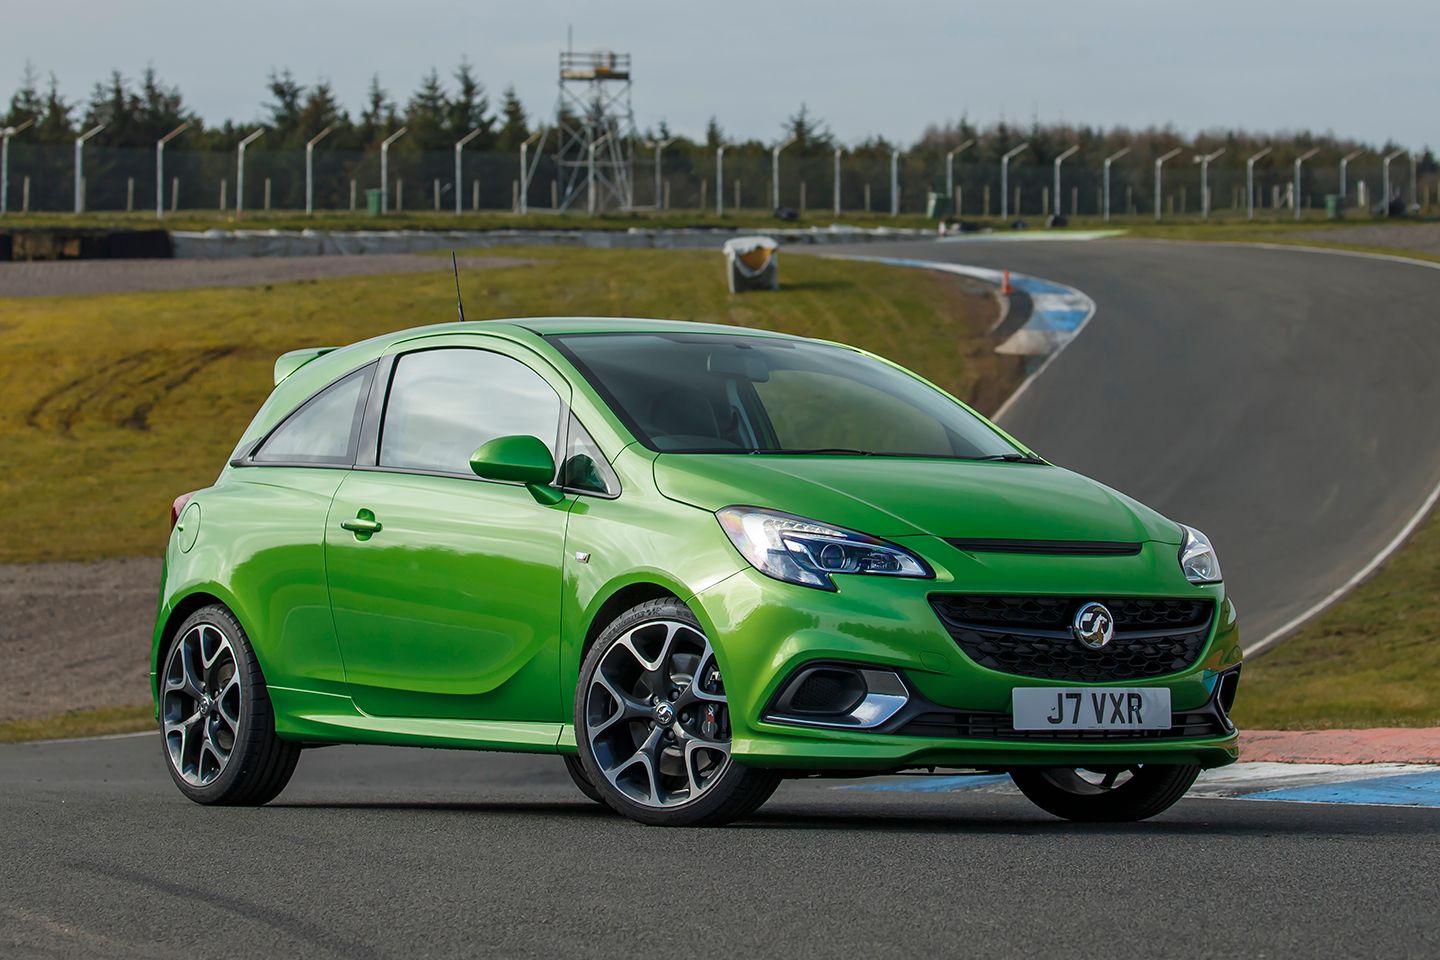 The Opel Corsa-e Is a Cute Electric Hatchback for Europe - Details, Specs